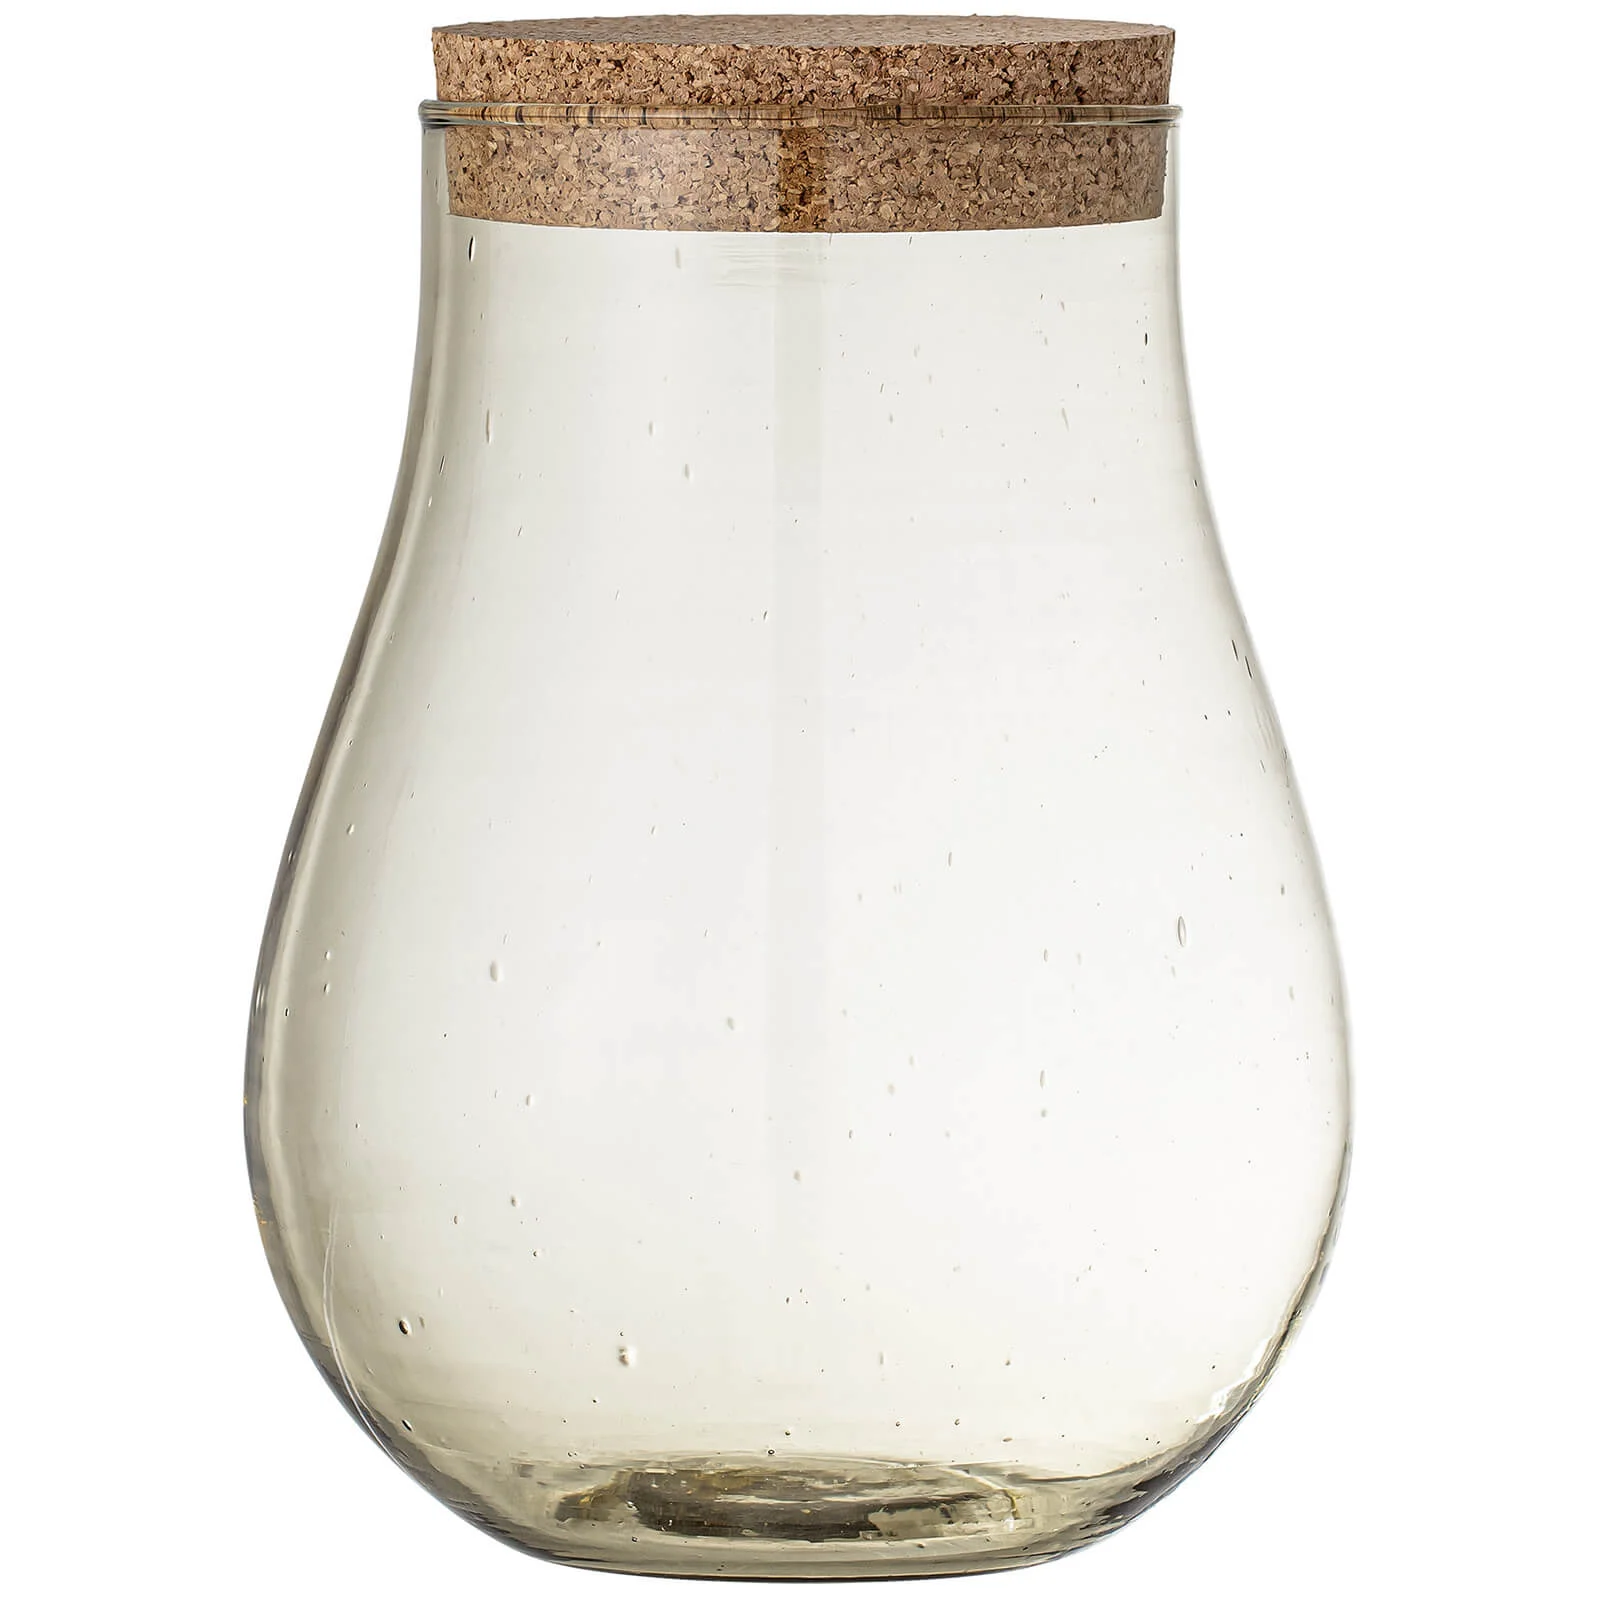 Bloomingville Recycled Glass Casie Jar - Small - Brown Image 1